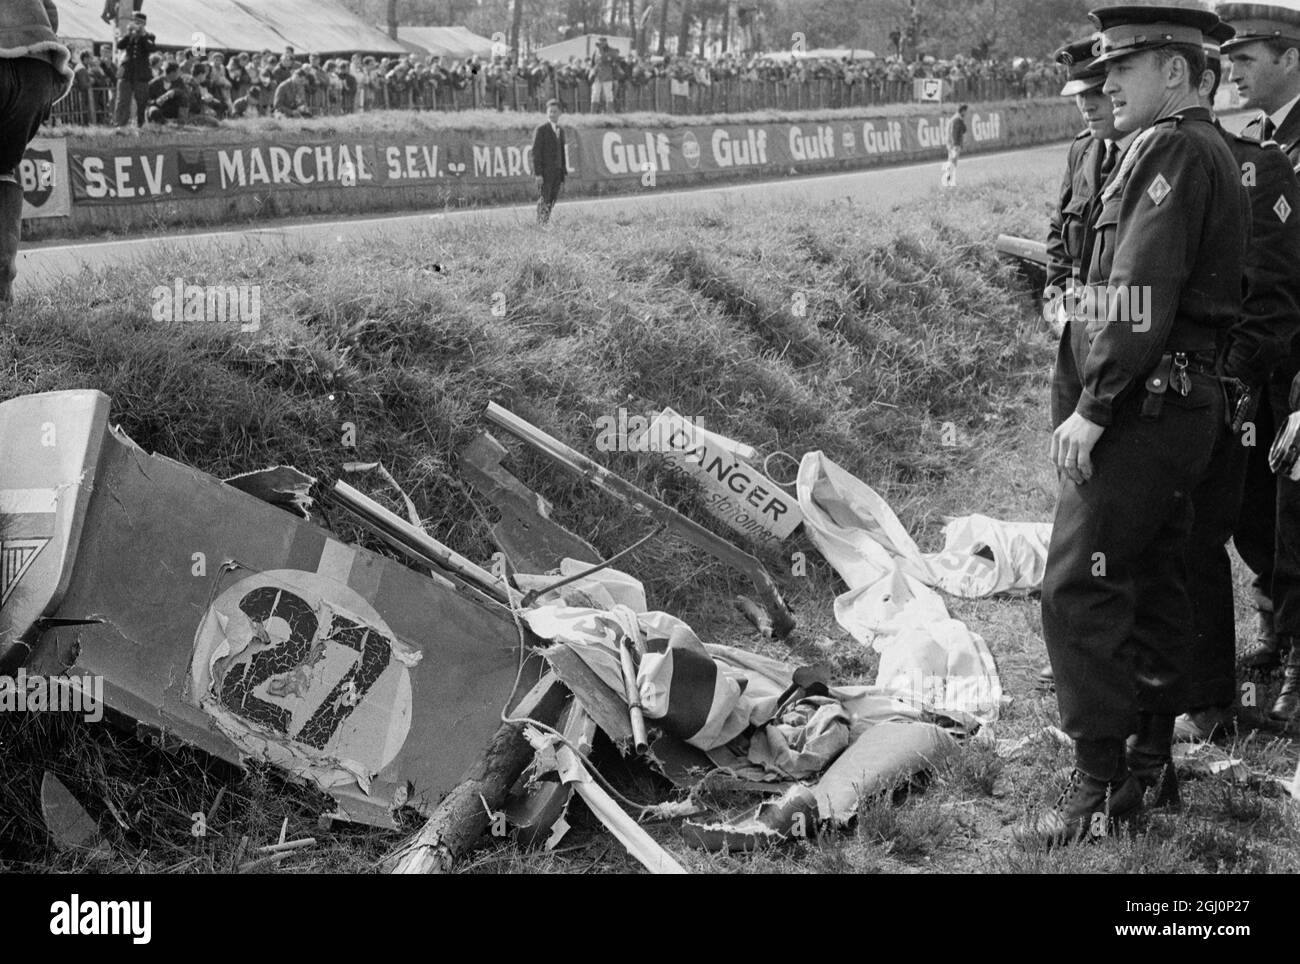 The wreckage of Belgian driver Mauro Bianchi's Alpine Renault had lost a wheel and crashed in flames during the gruelling 24 hour Le Mans Race here 29 September 1968 . Mauro was taken to hospital with burns on the hands and face . The race was won by his brother , Lucien and co-driver Pedro Rodriguez driving a British built , American powered Ford sports car . 1 October 1968 Stock Photo